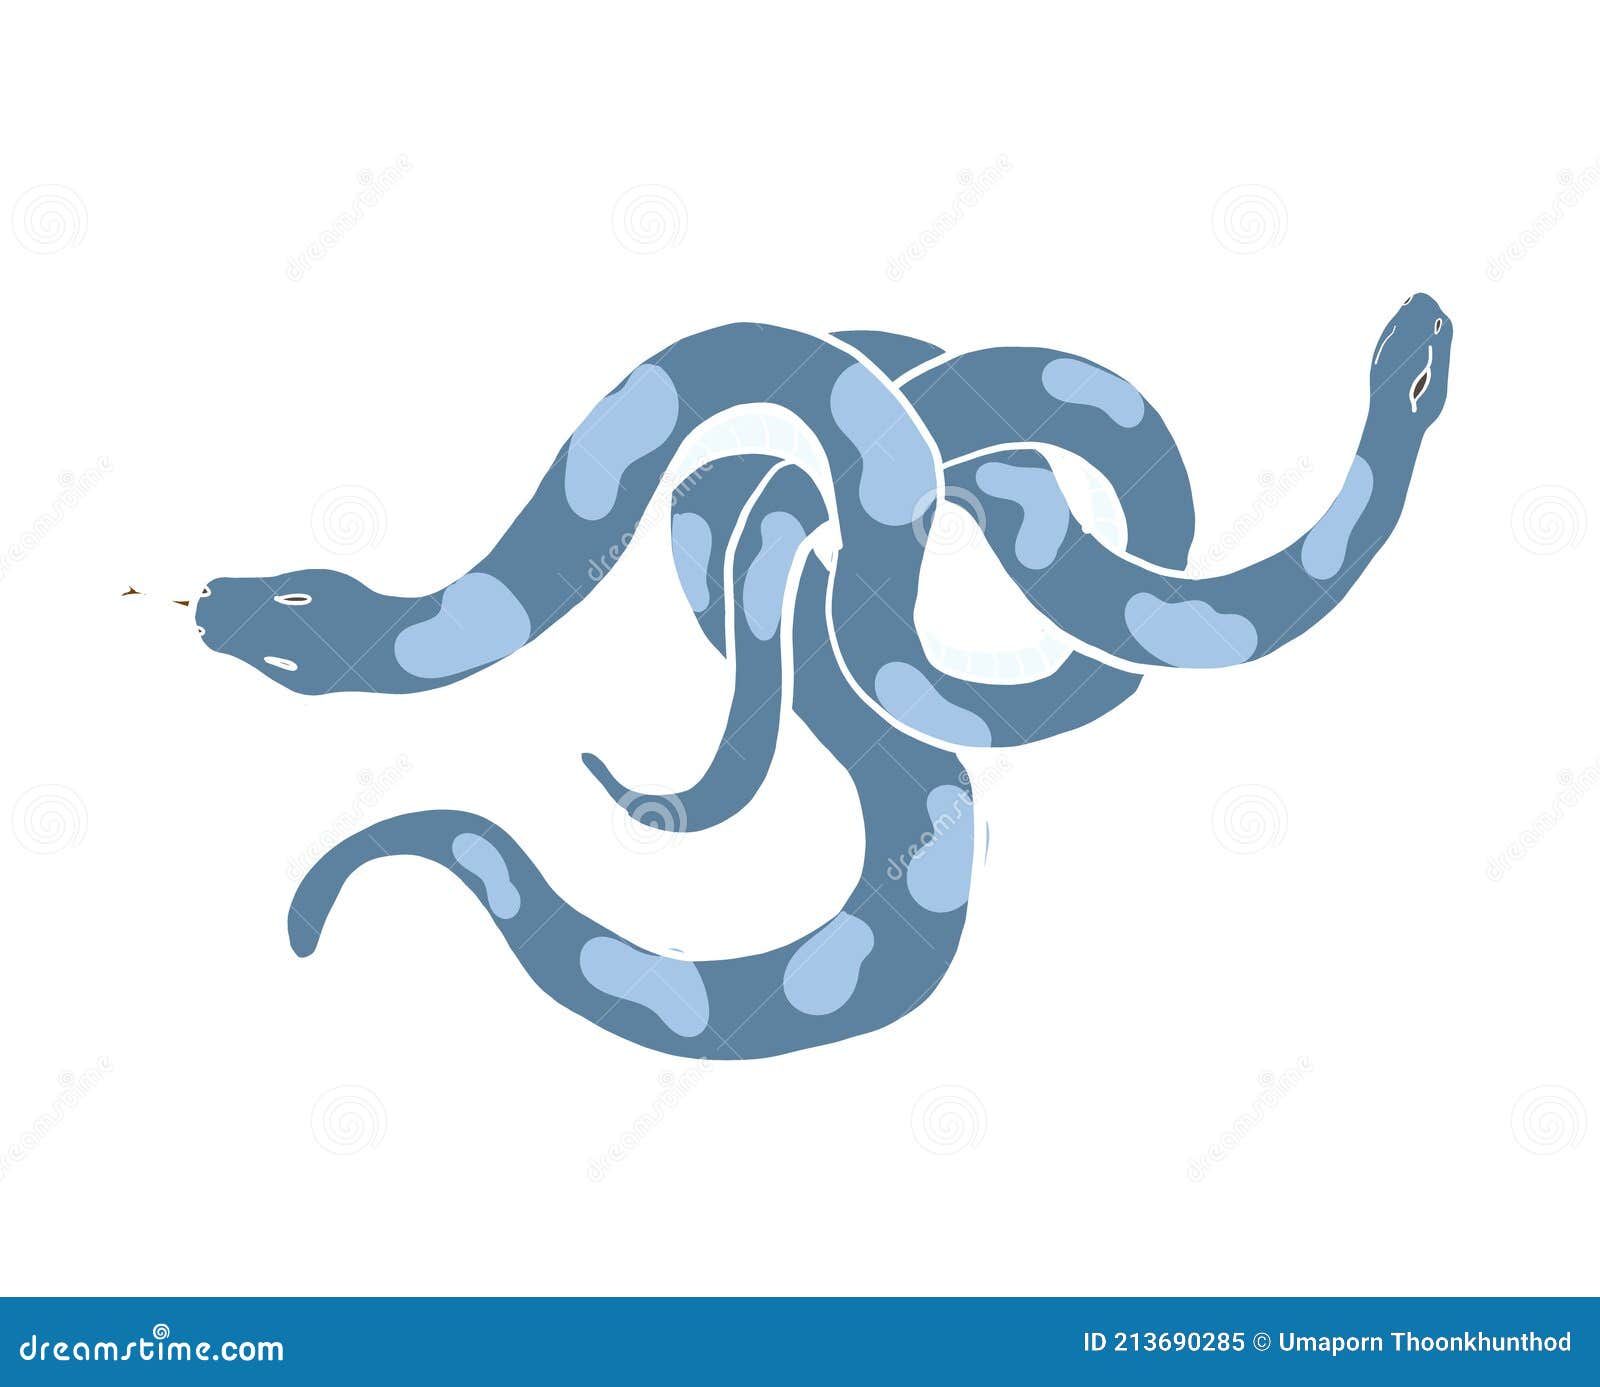 Snake Vector Illustration on  Design Snake Reptile for  Printing and  Sign Vector Such As a Gemini. Stock Illustration  - Illustration of astrology, design: 213690285